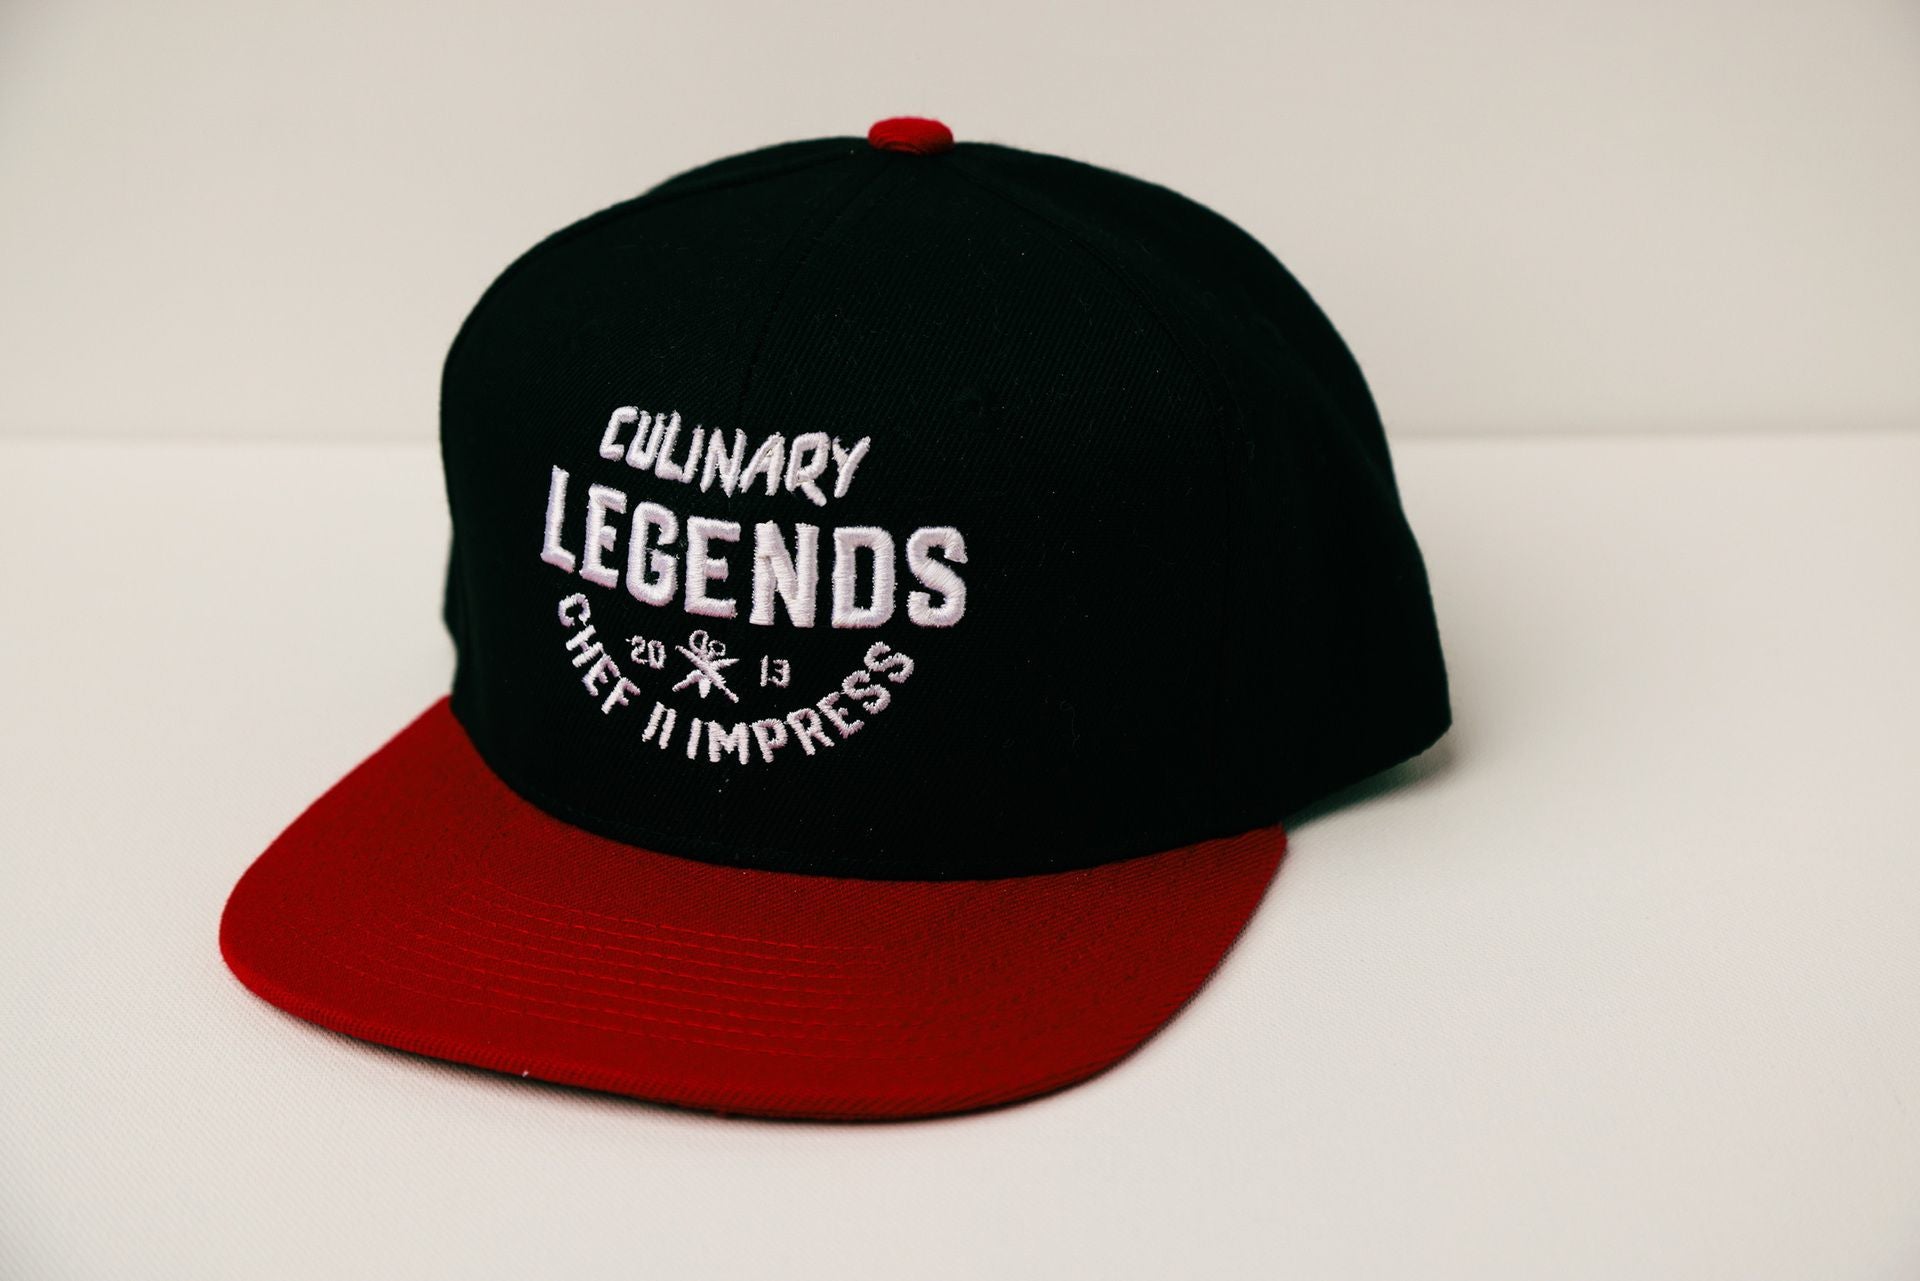 Culinary Legends Hat Black/Red